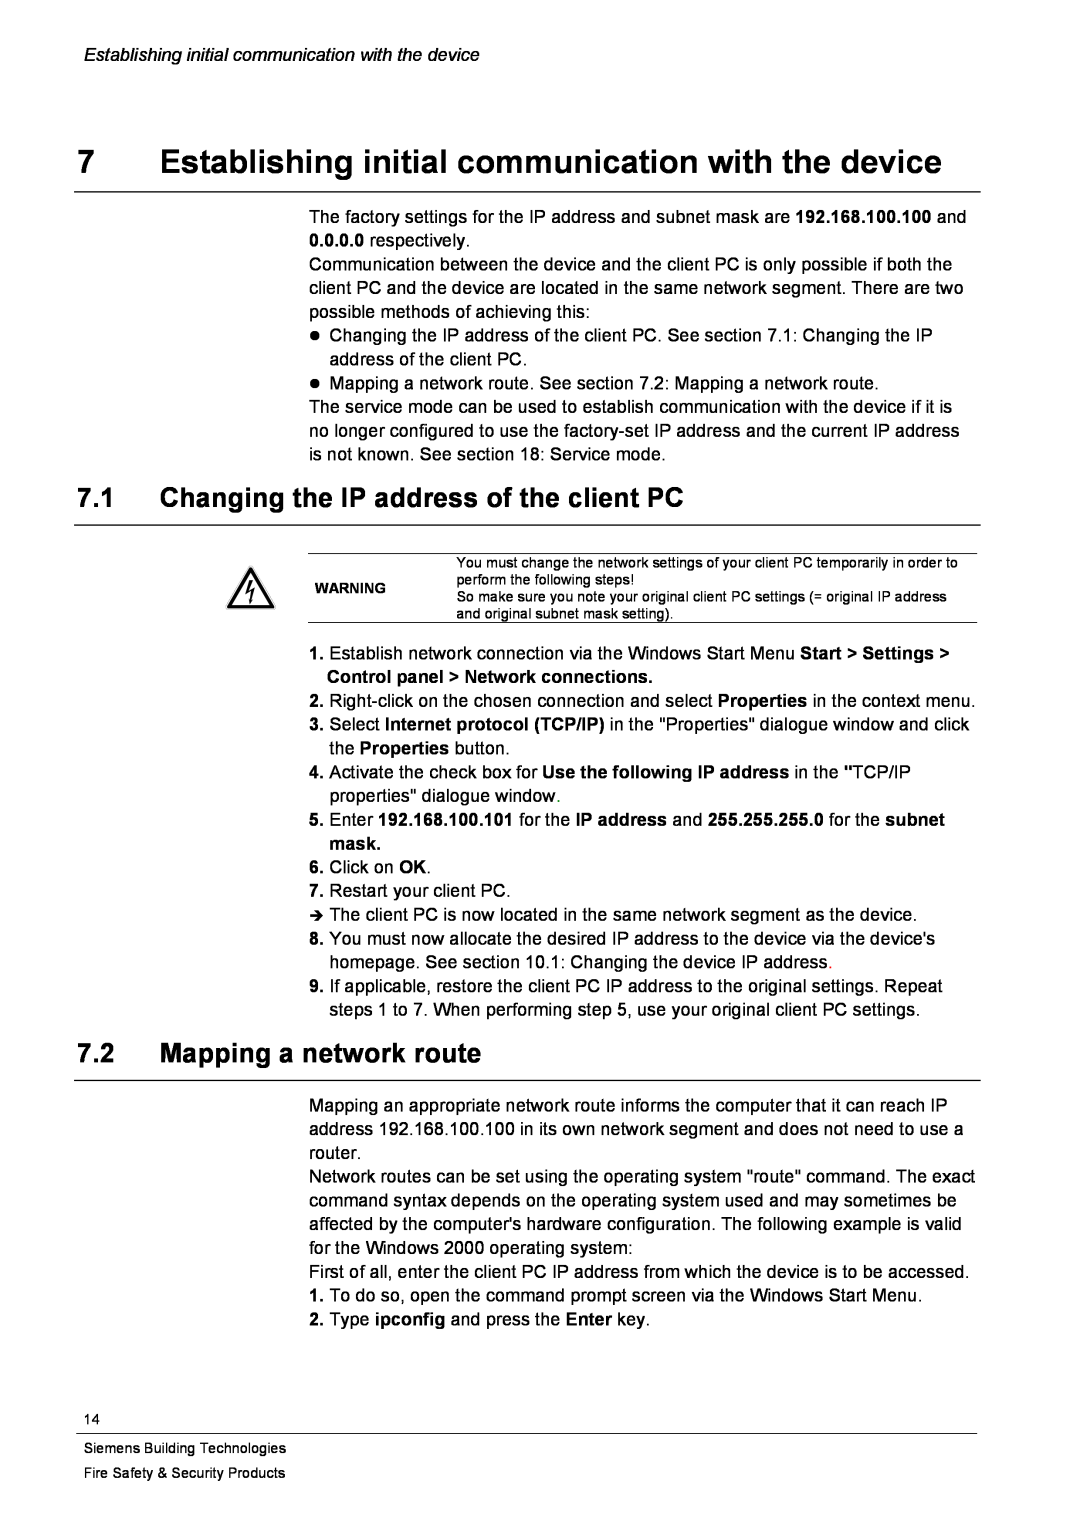 Siemens CFVA-IP 7.1Changing the IP address of the client PC, 7.2Mapping a network route, Control panel Network connections 